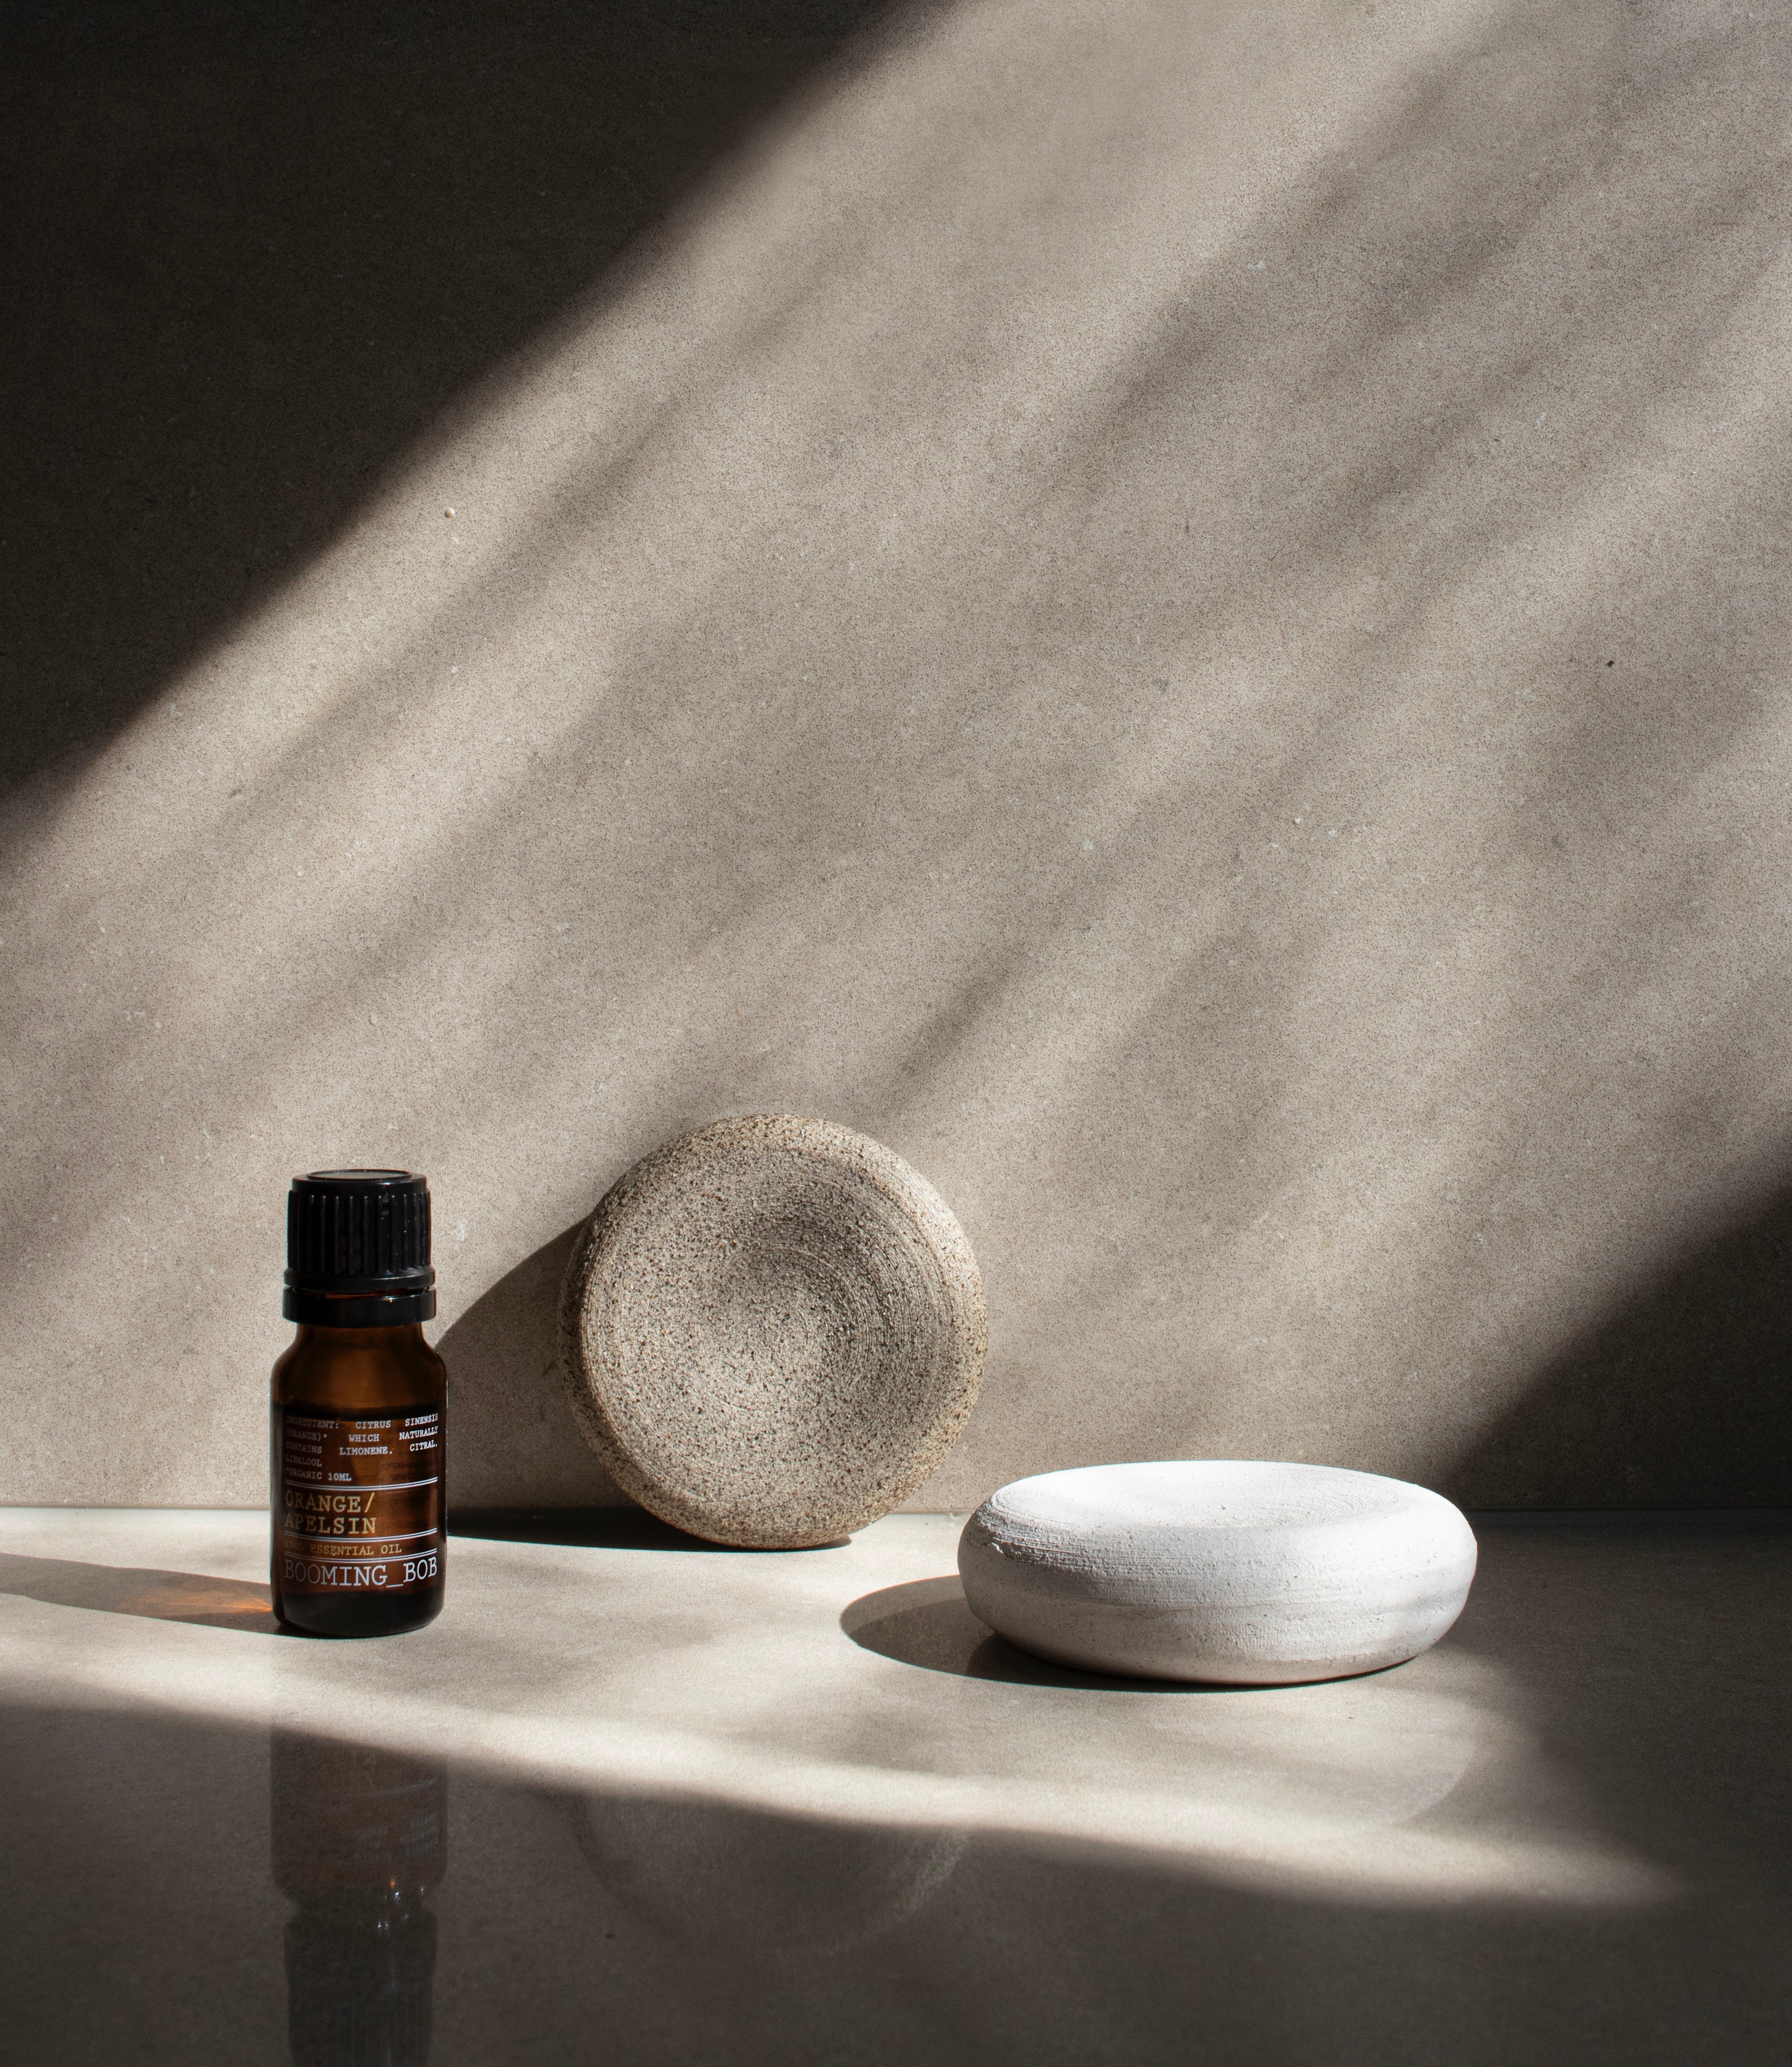 Essential Oils & Diffusers